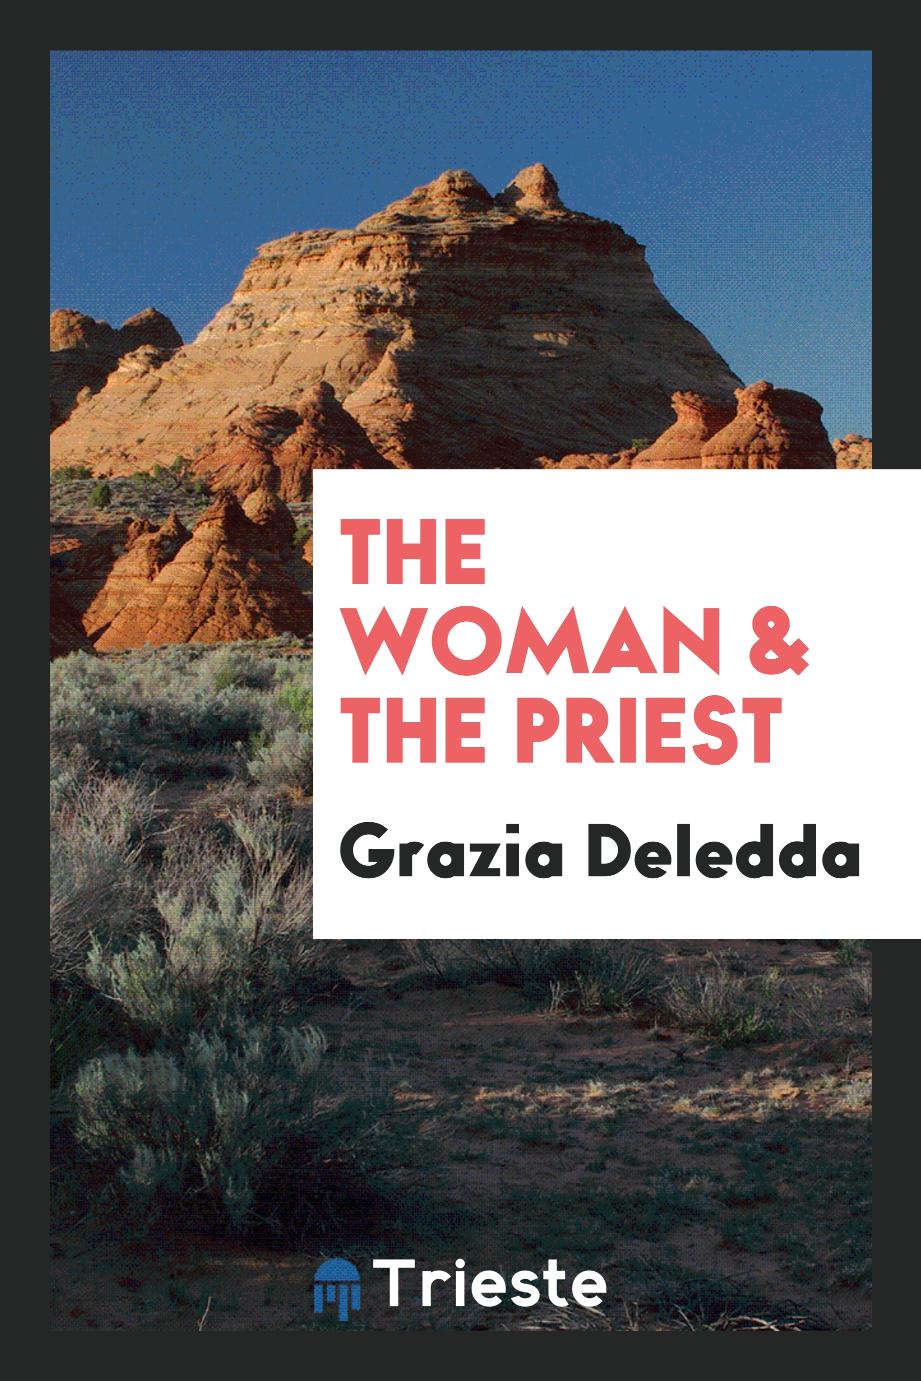 The woman & the priest